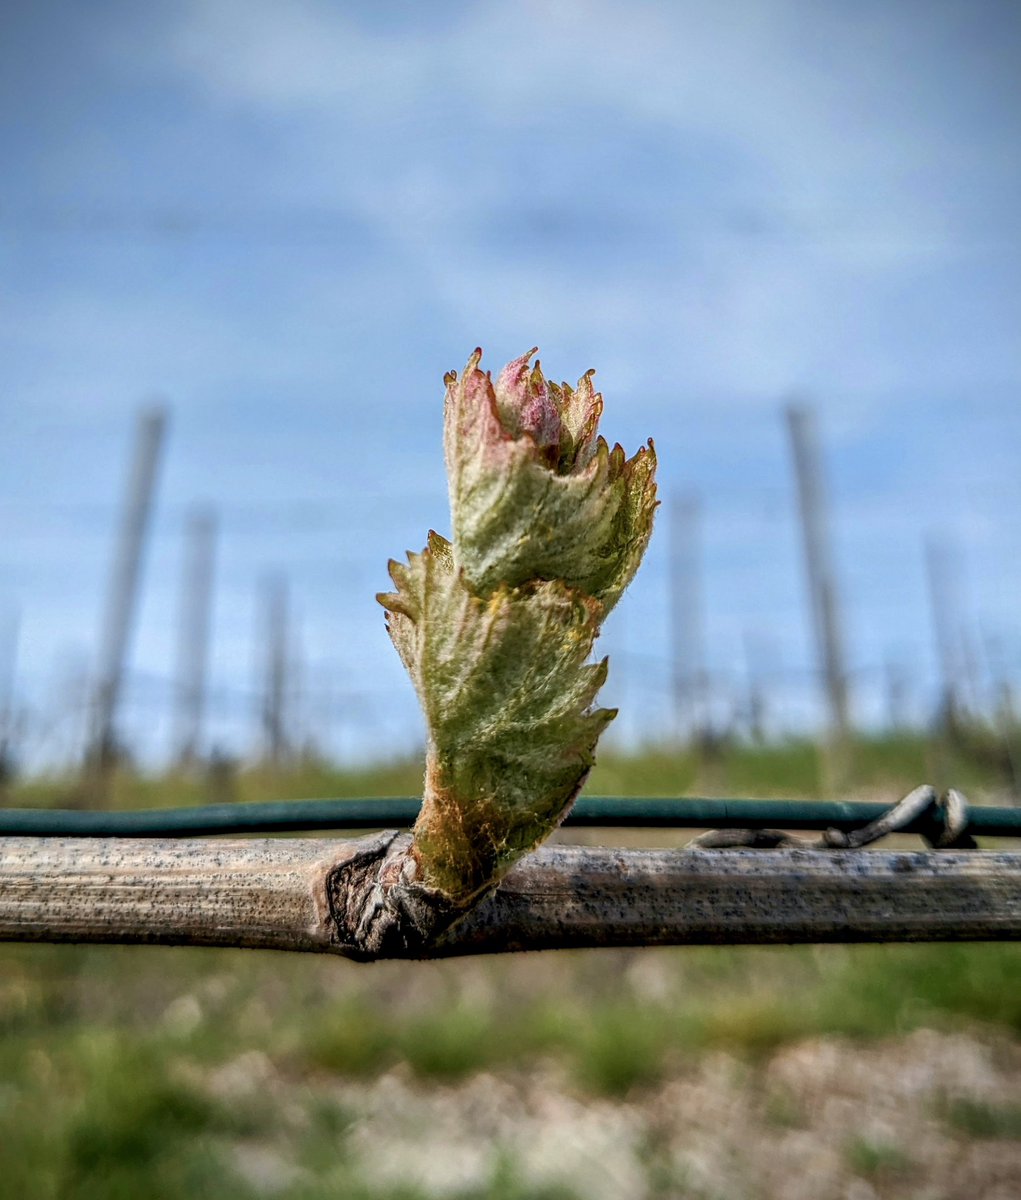 The first buds in our vineyards herald a new season full of promise. Welcome spring! #elviocogno #spring #vineyards